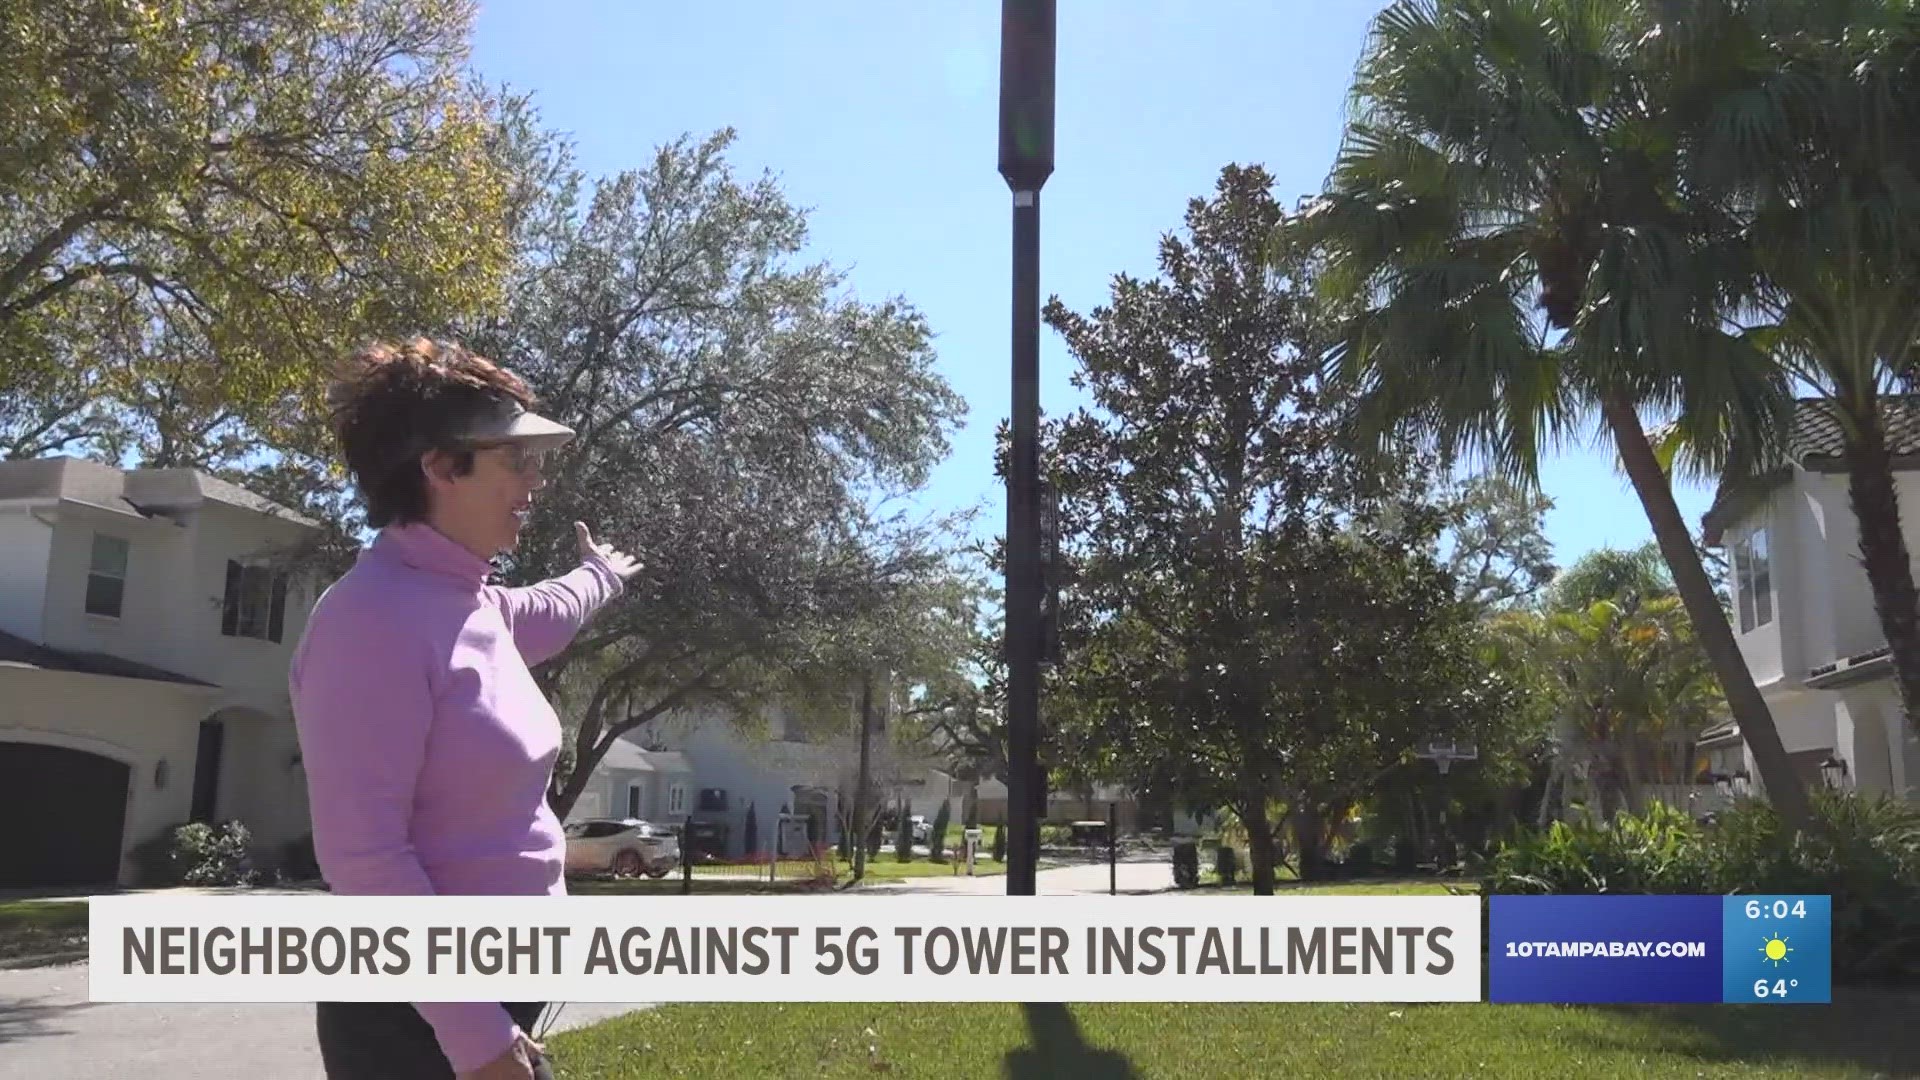 Florida's 'Advanced Wireless Infrastructure Deployment Act' allows cellular companies to install smaller 5G cell towers without local government approval.